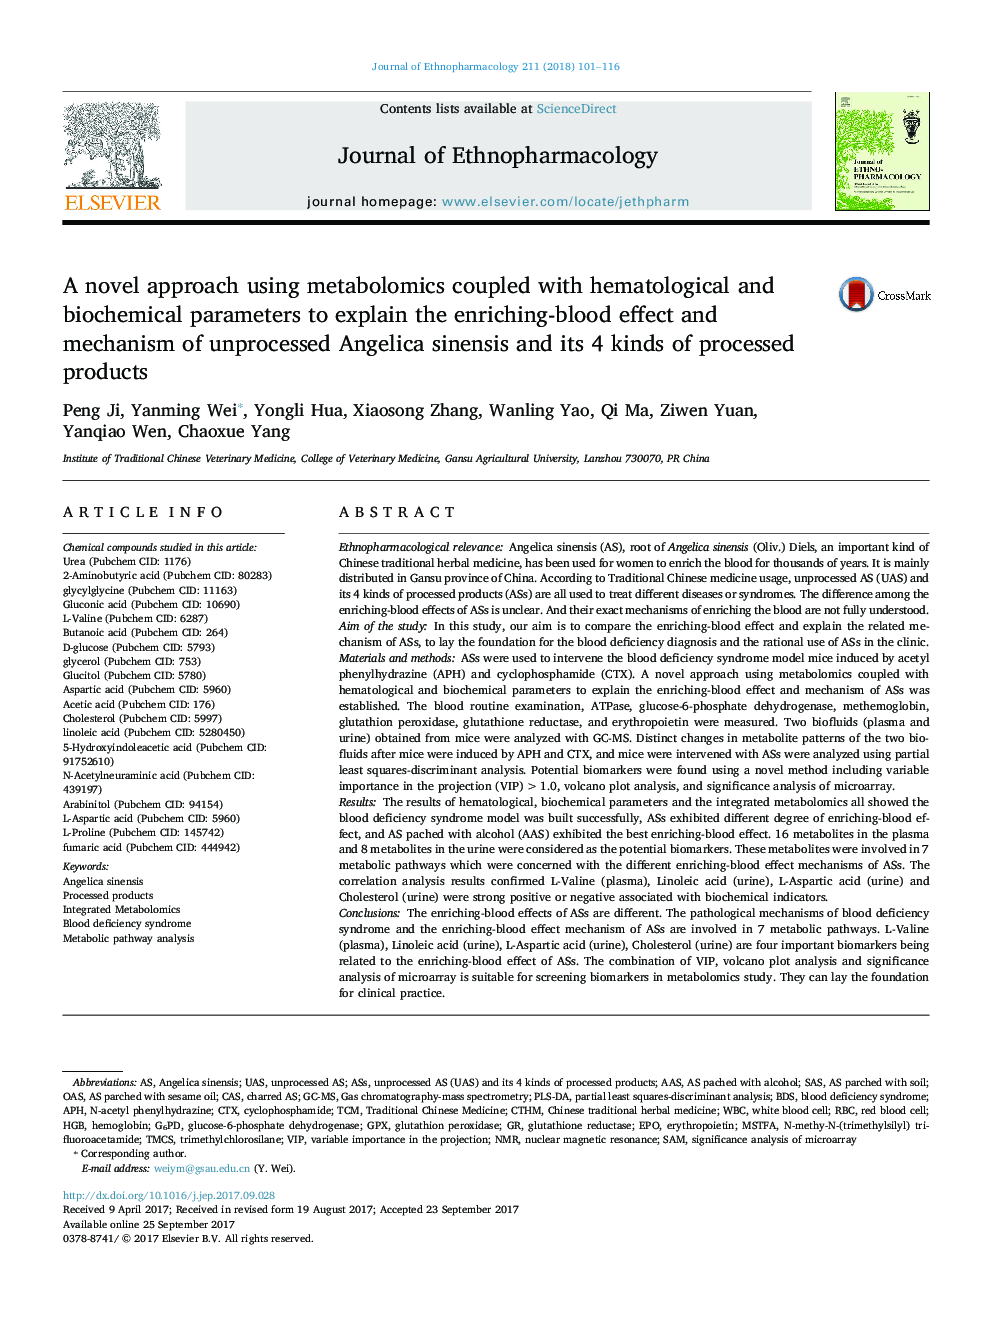 A novel approach using metabolomics coupled with hematological and biochemical parameters to explain the enriching-blood effect and mechanism of unprocessed Angelica sinensis and its 4 kinds of processed products